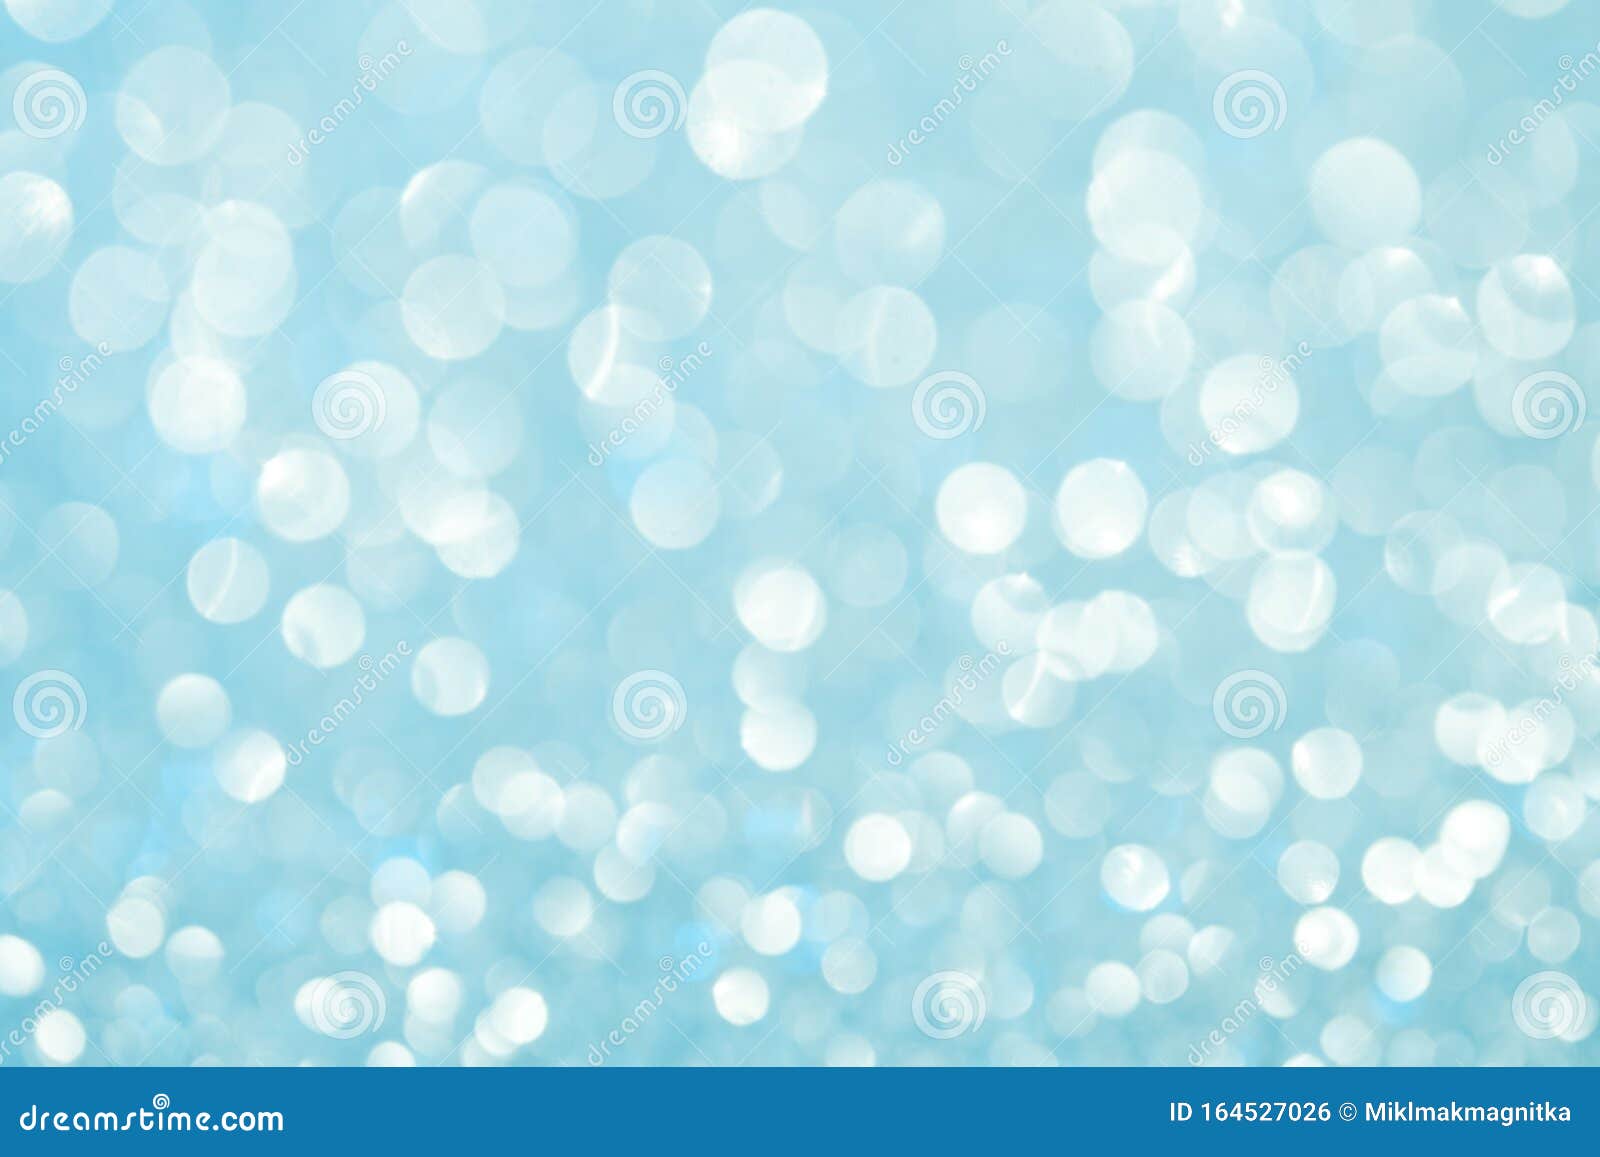 7,277,608 Bright Background Stock Photos - Free & Royalty-Free Stock Photos  from Dreamstime